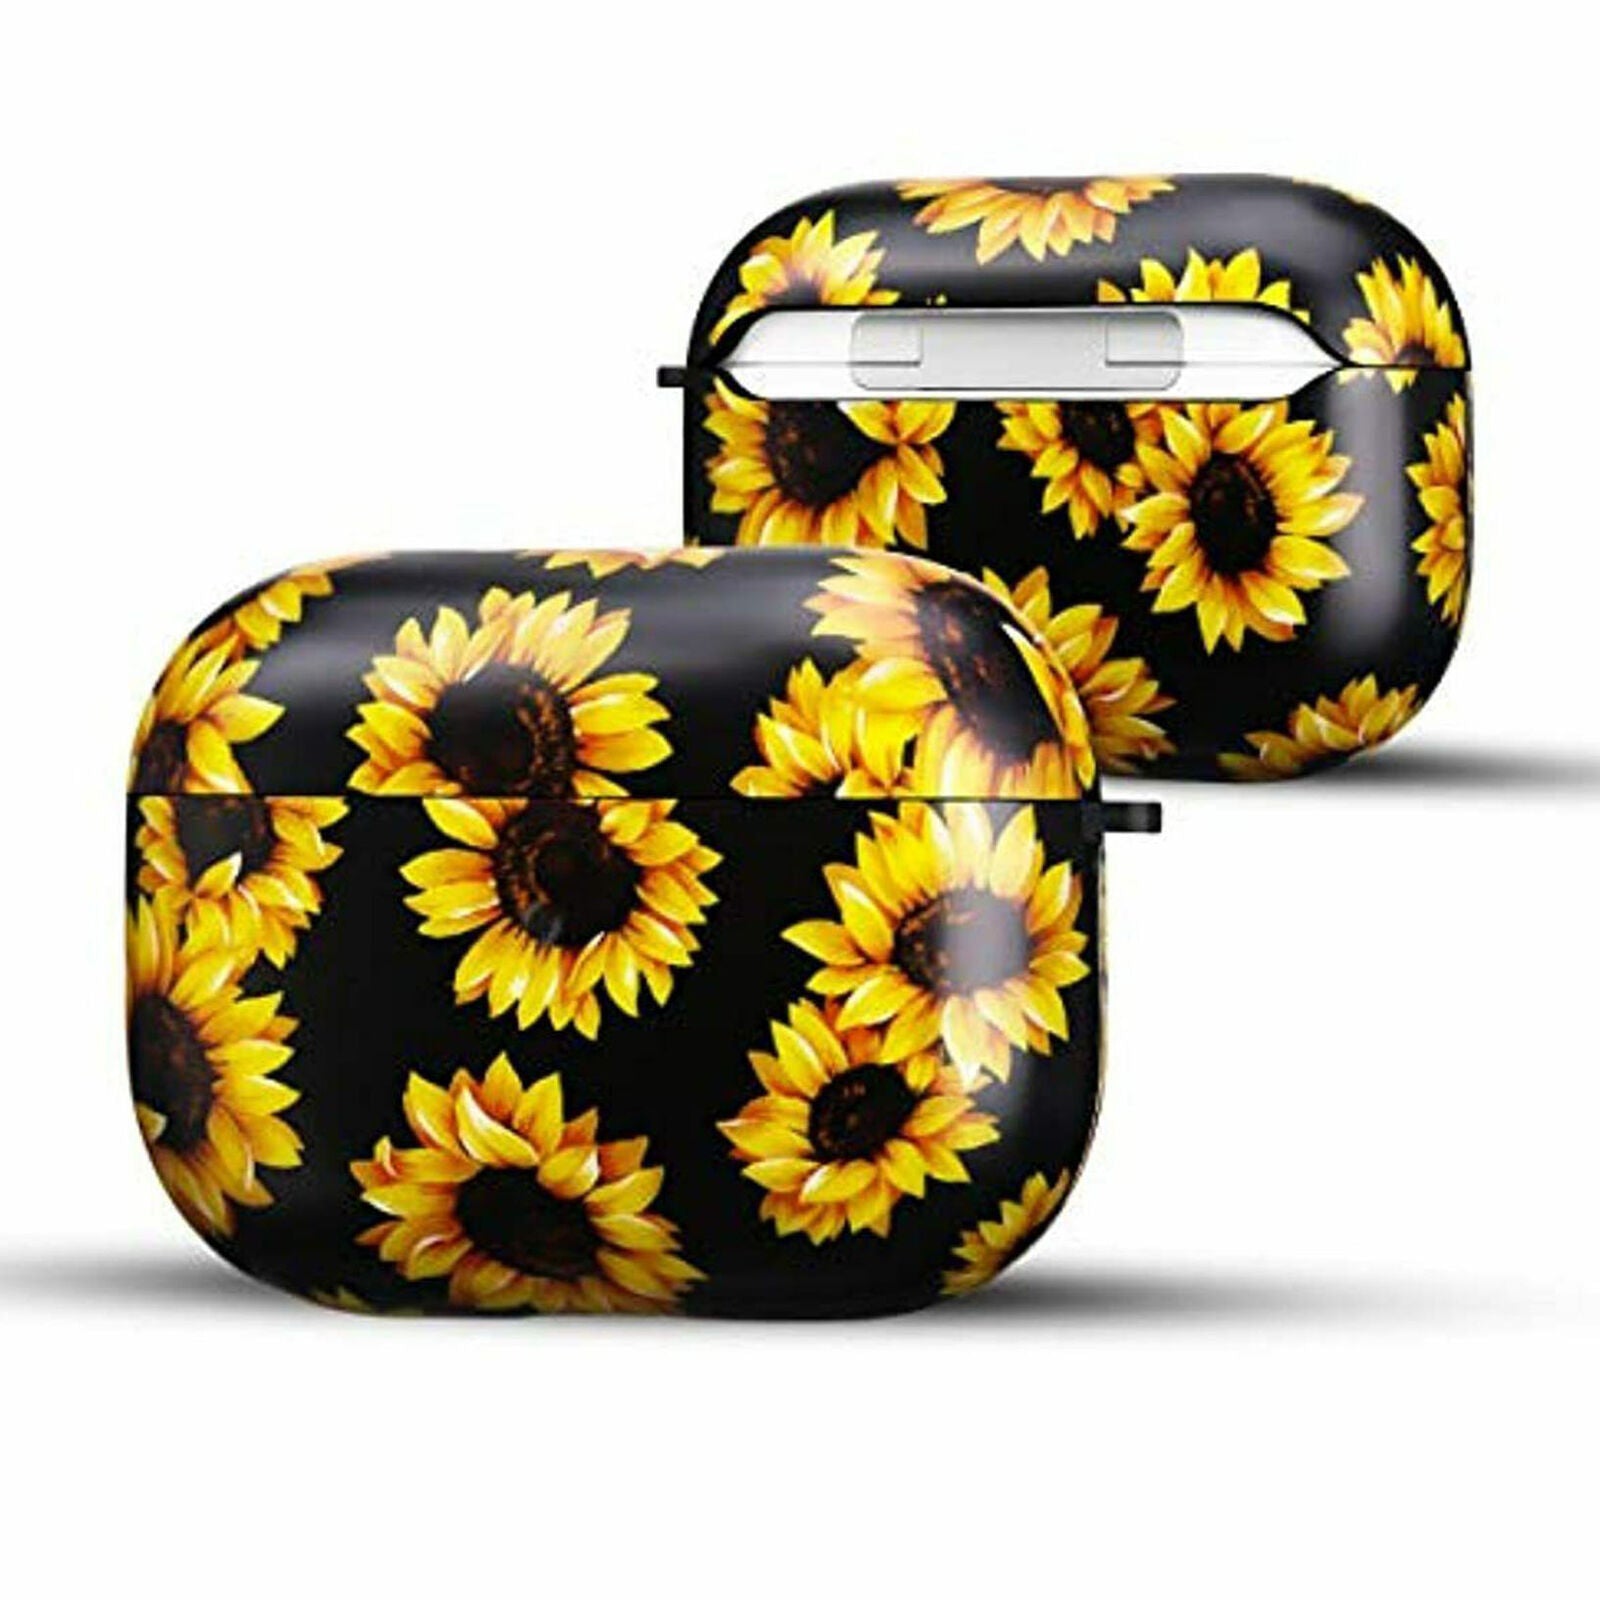 Sunflower For Airpod Pro Case Flexible Silicone Cover Cute Flower Floral Yellow